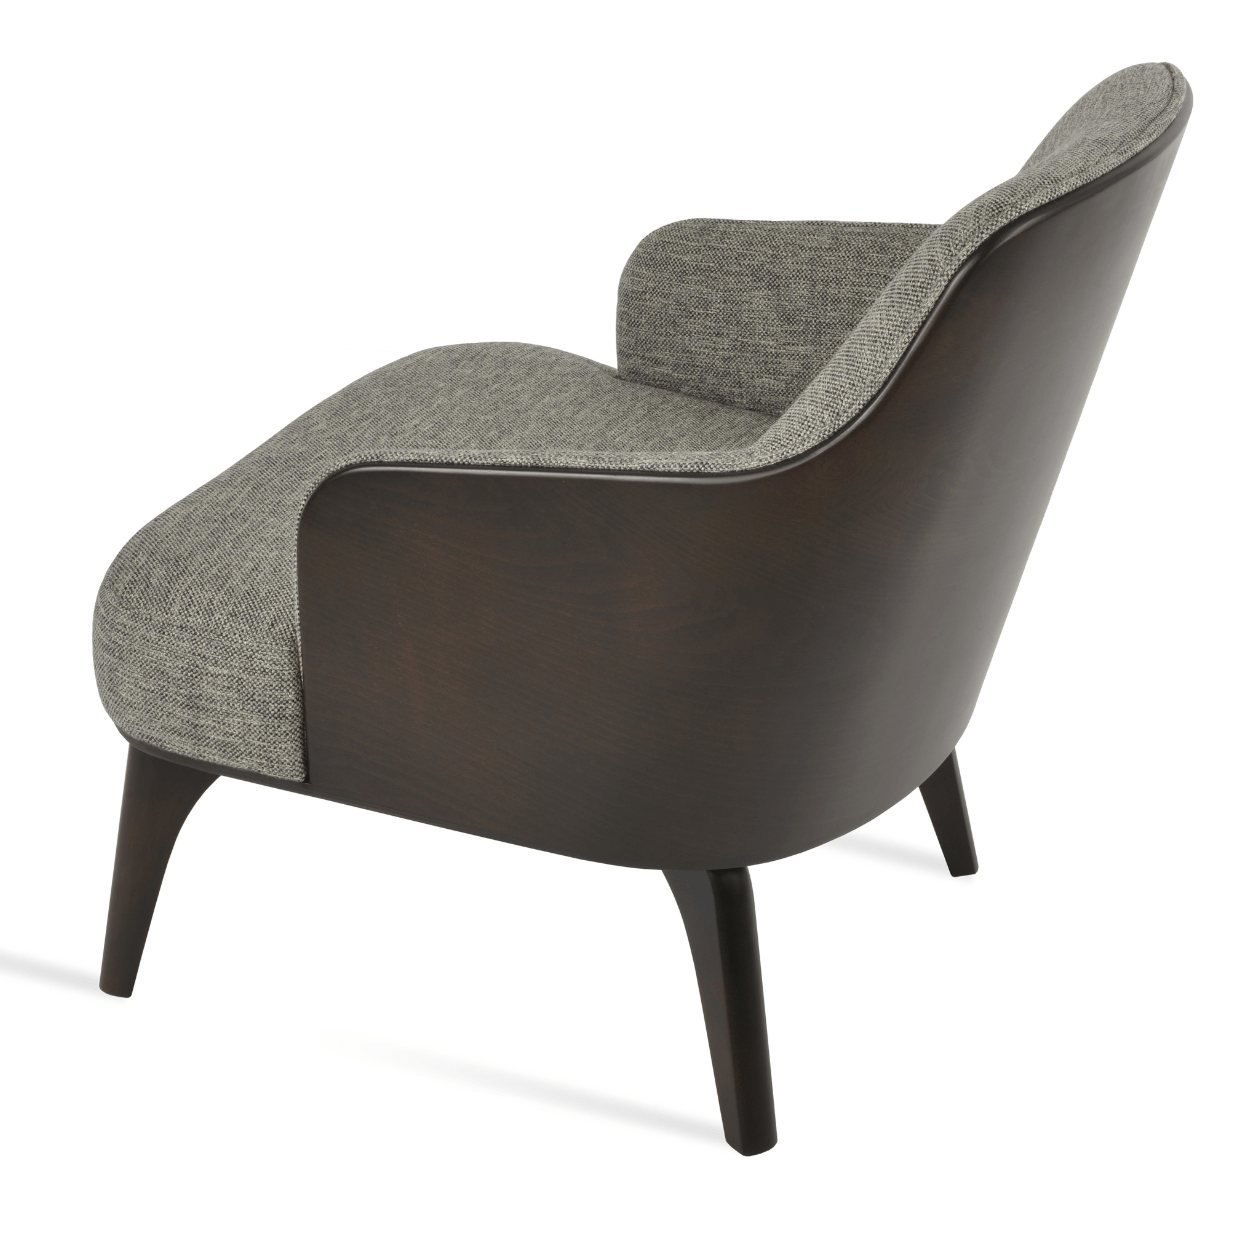 Saphire Rounded Upholstery Armchair - Your Bar Stools Canada